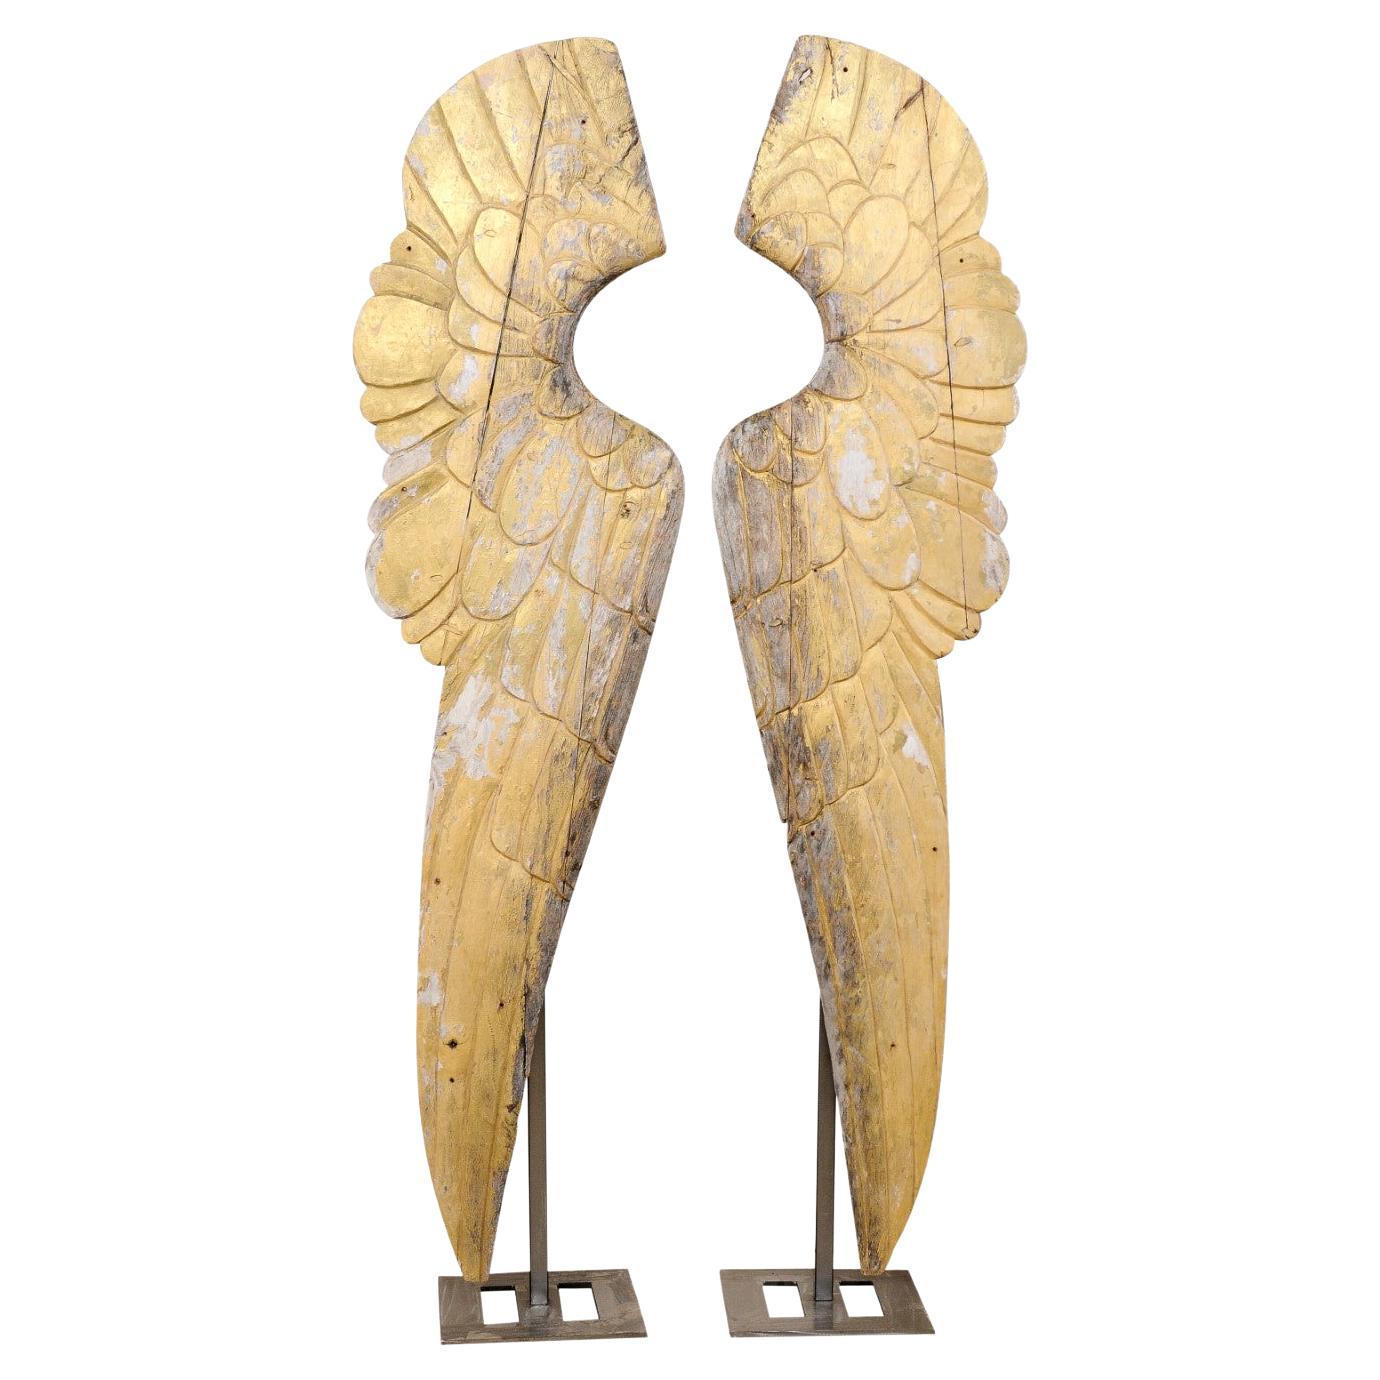 Pair of Impressively Large 8.5 Ft Tall European Gilt Wings on Custom Iron Stands